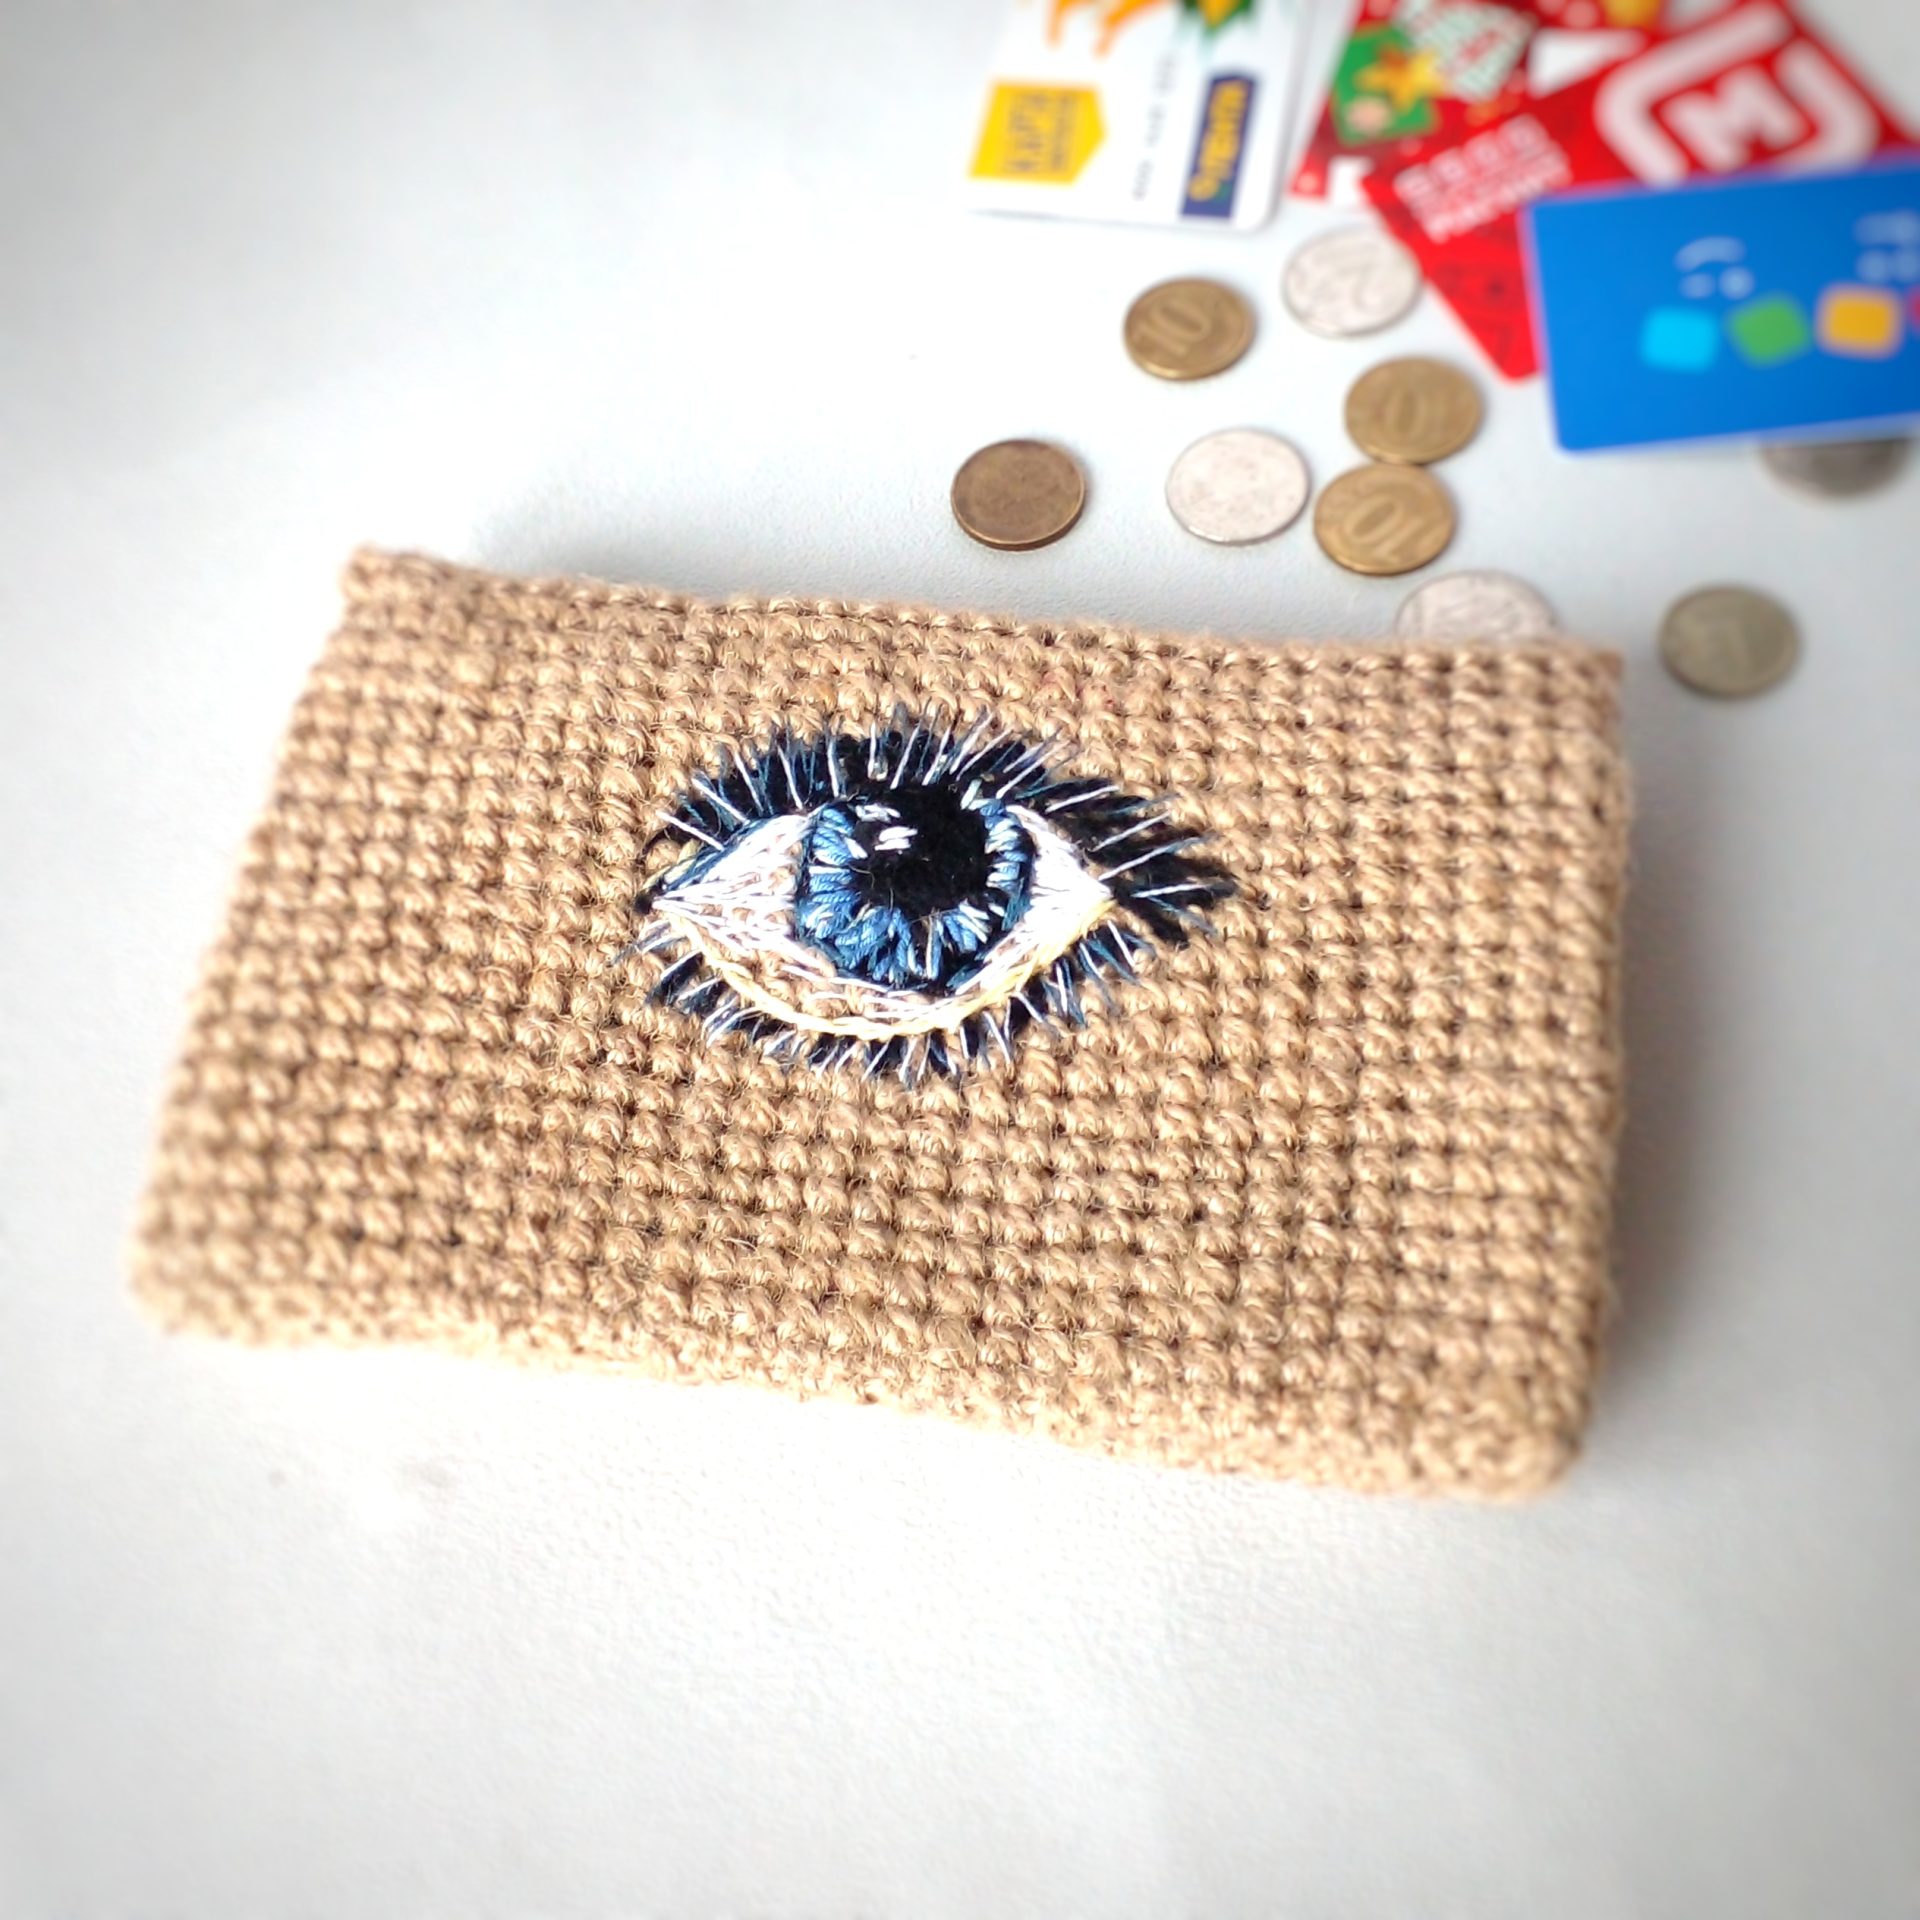 The wallet is crocheted from jute hand embroidery